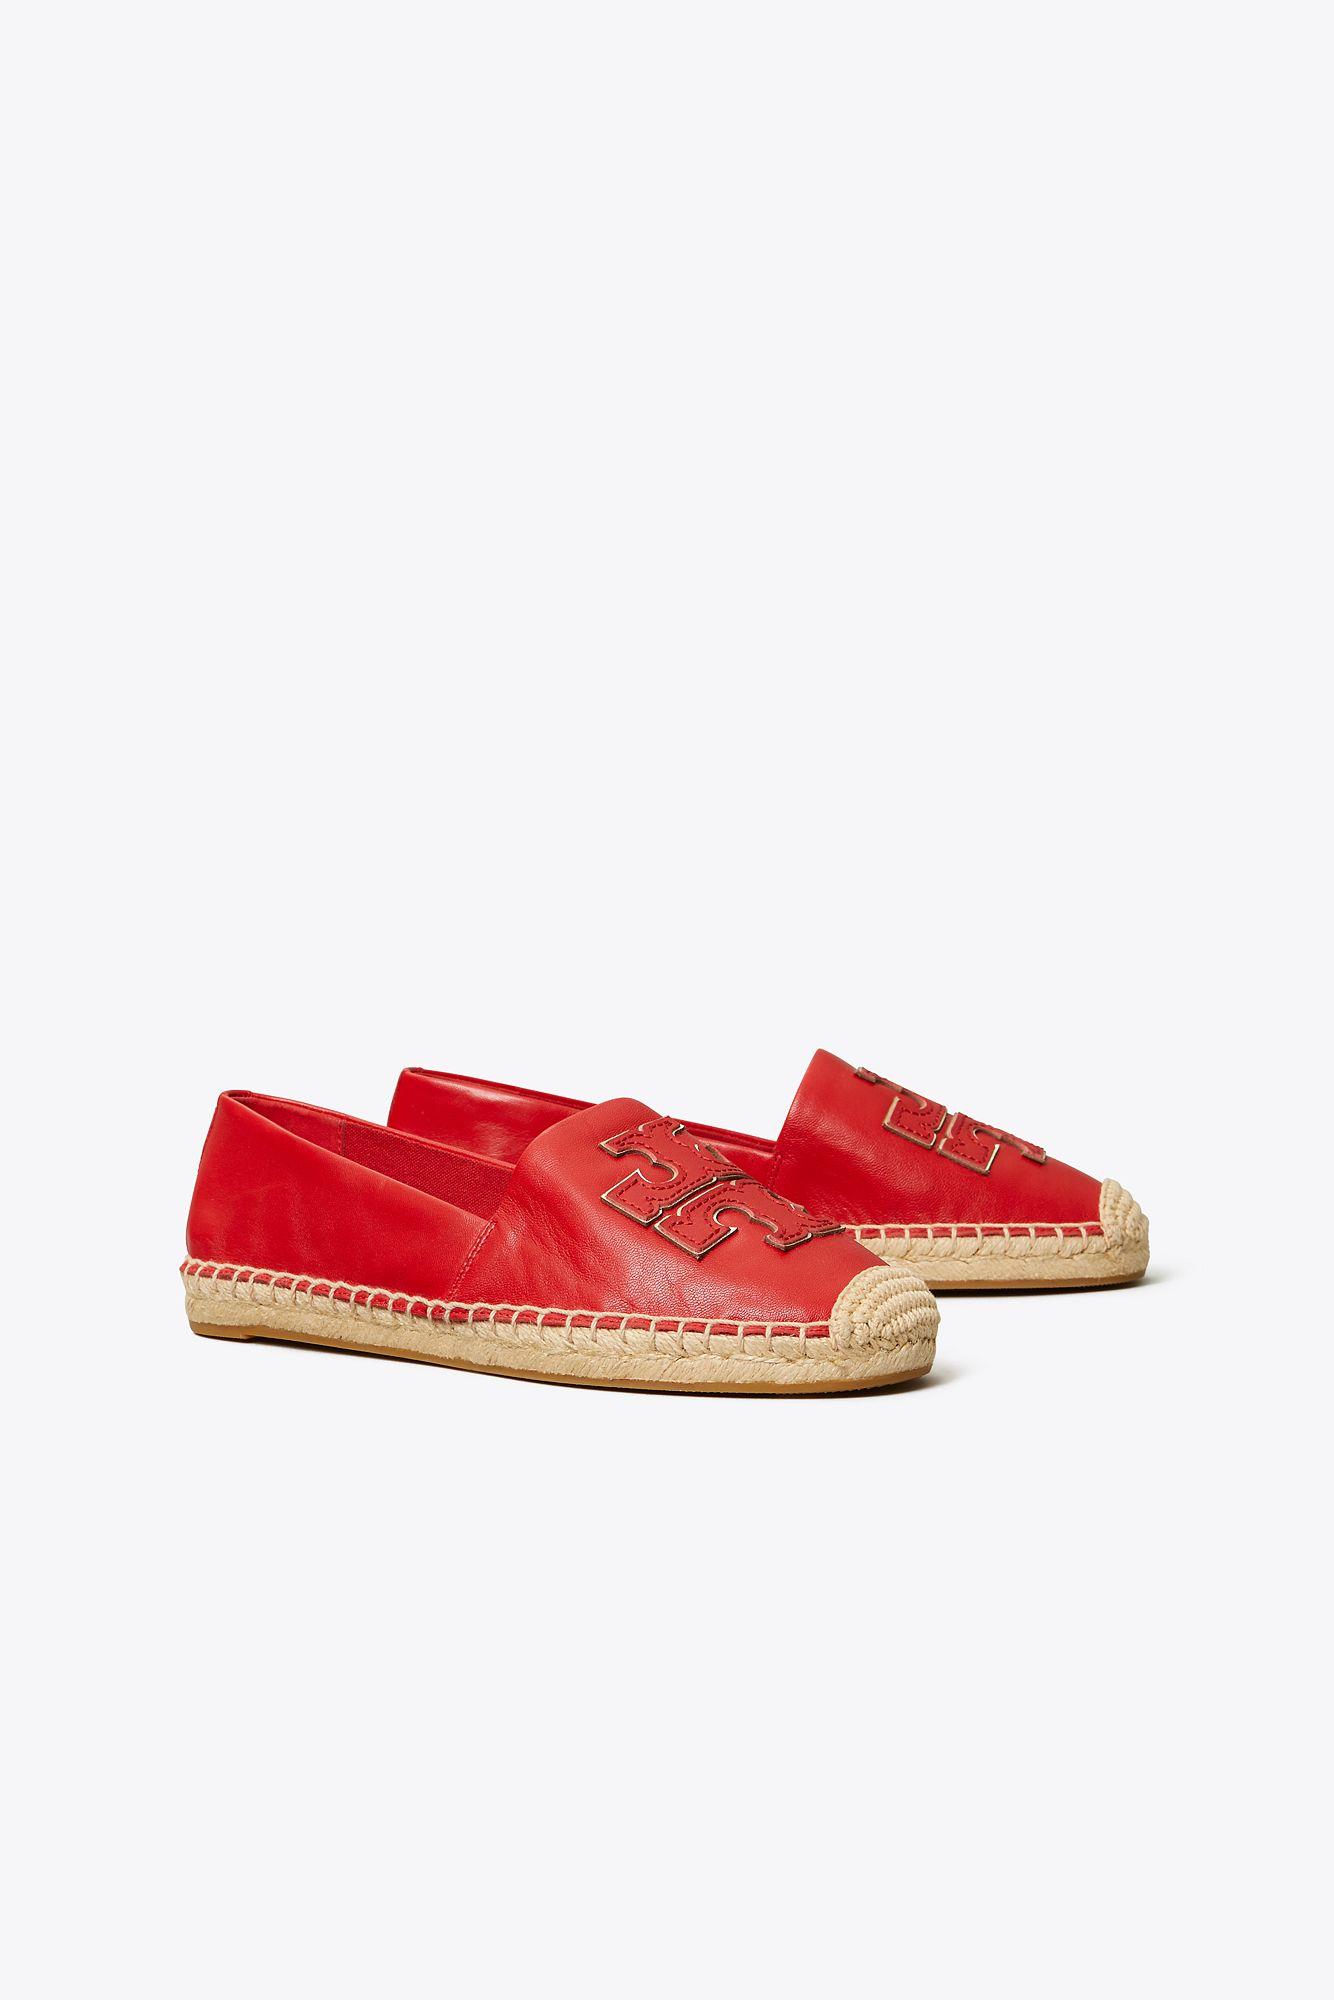 Tory Burch Ines Leather Espadrilles in Red | Lyst